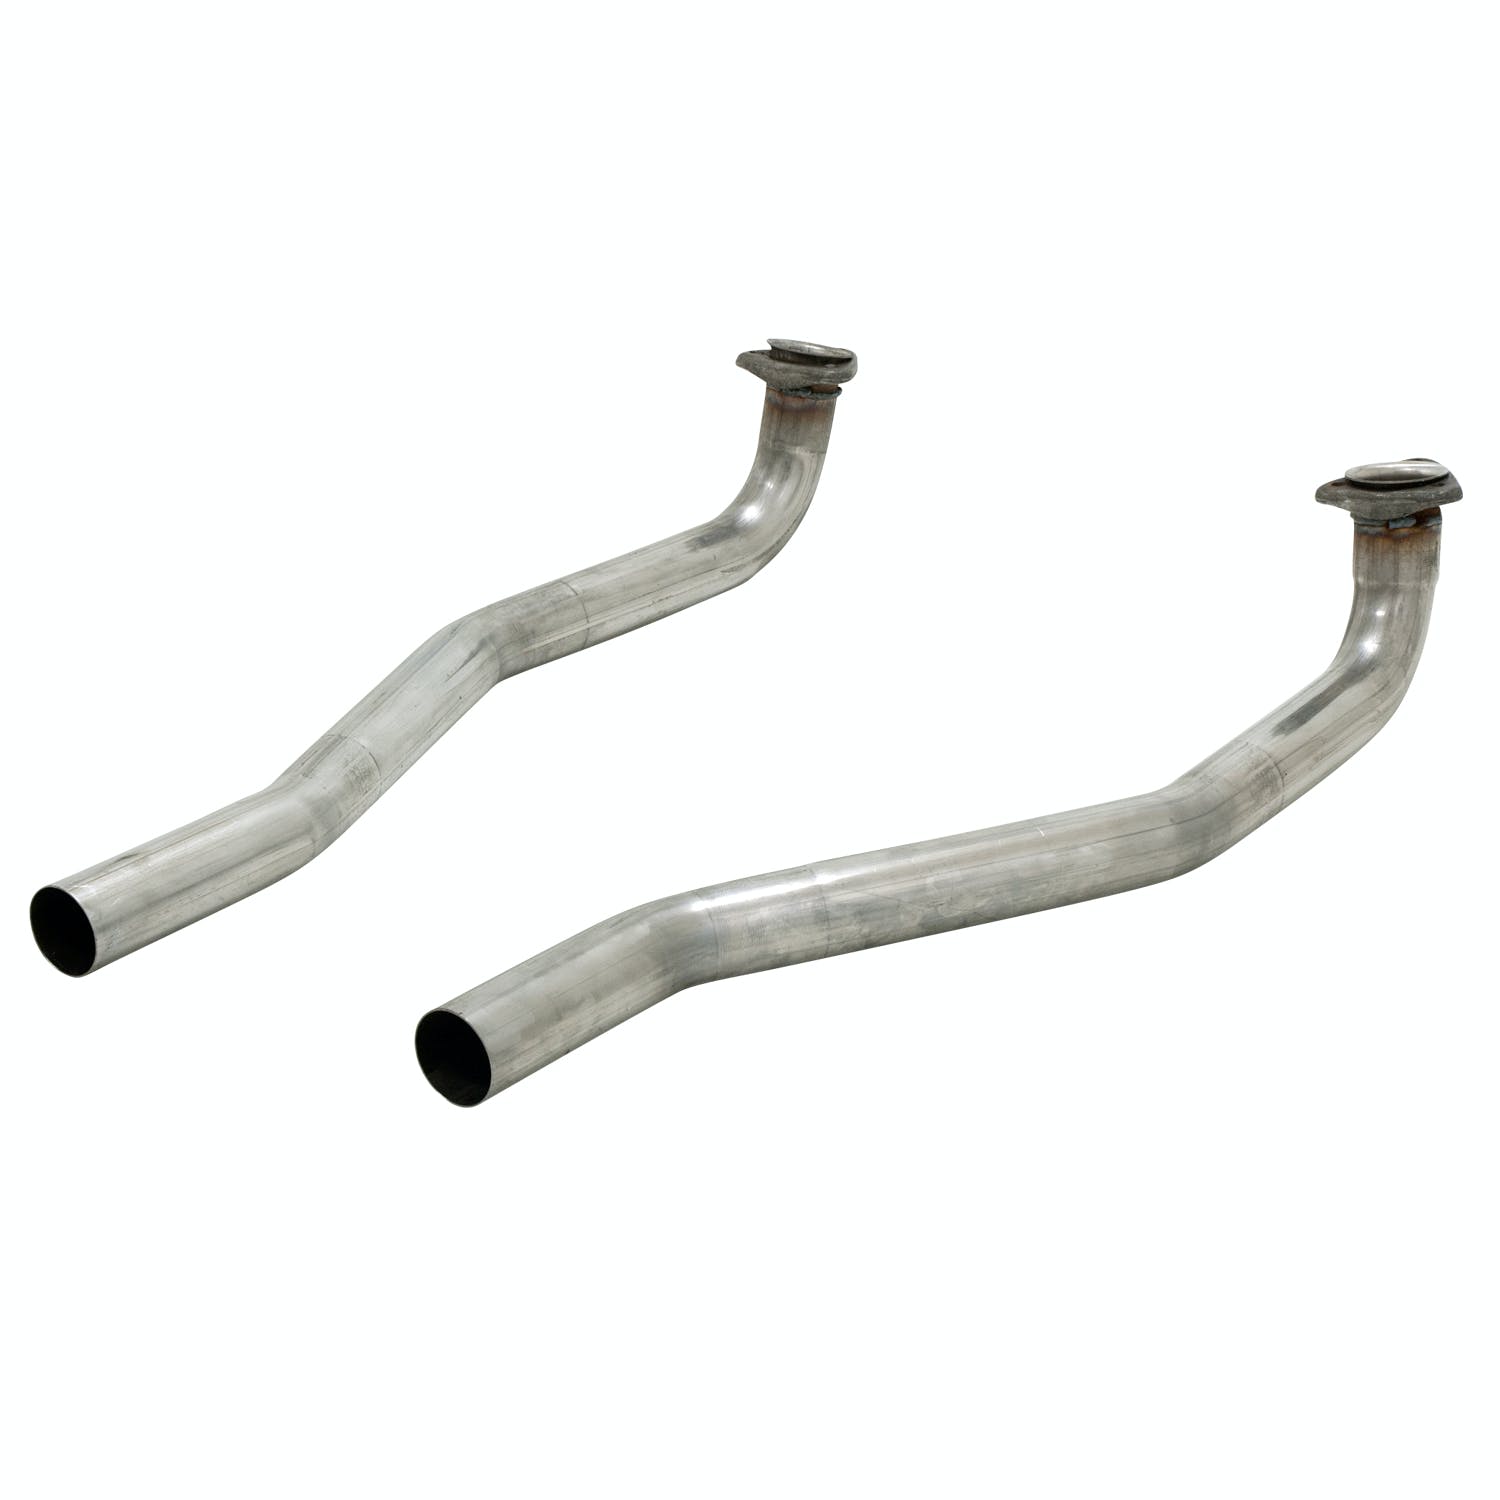 Flowmaster 81075 MANIFOLD PIPES CHEVY FS CAR BB 65-67 409